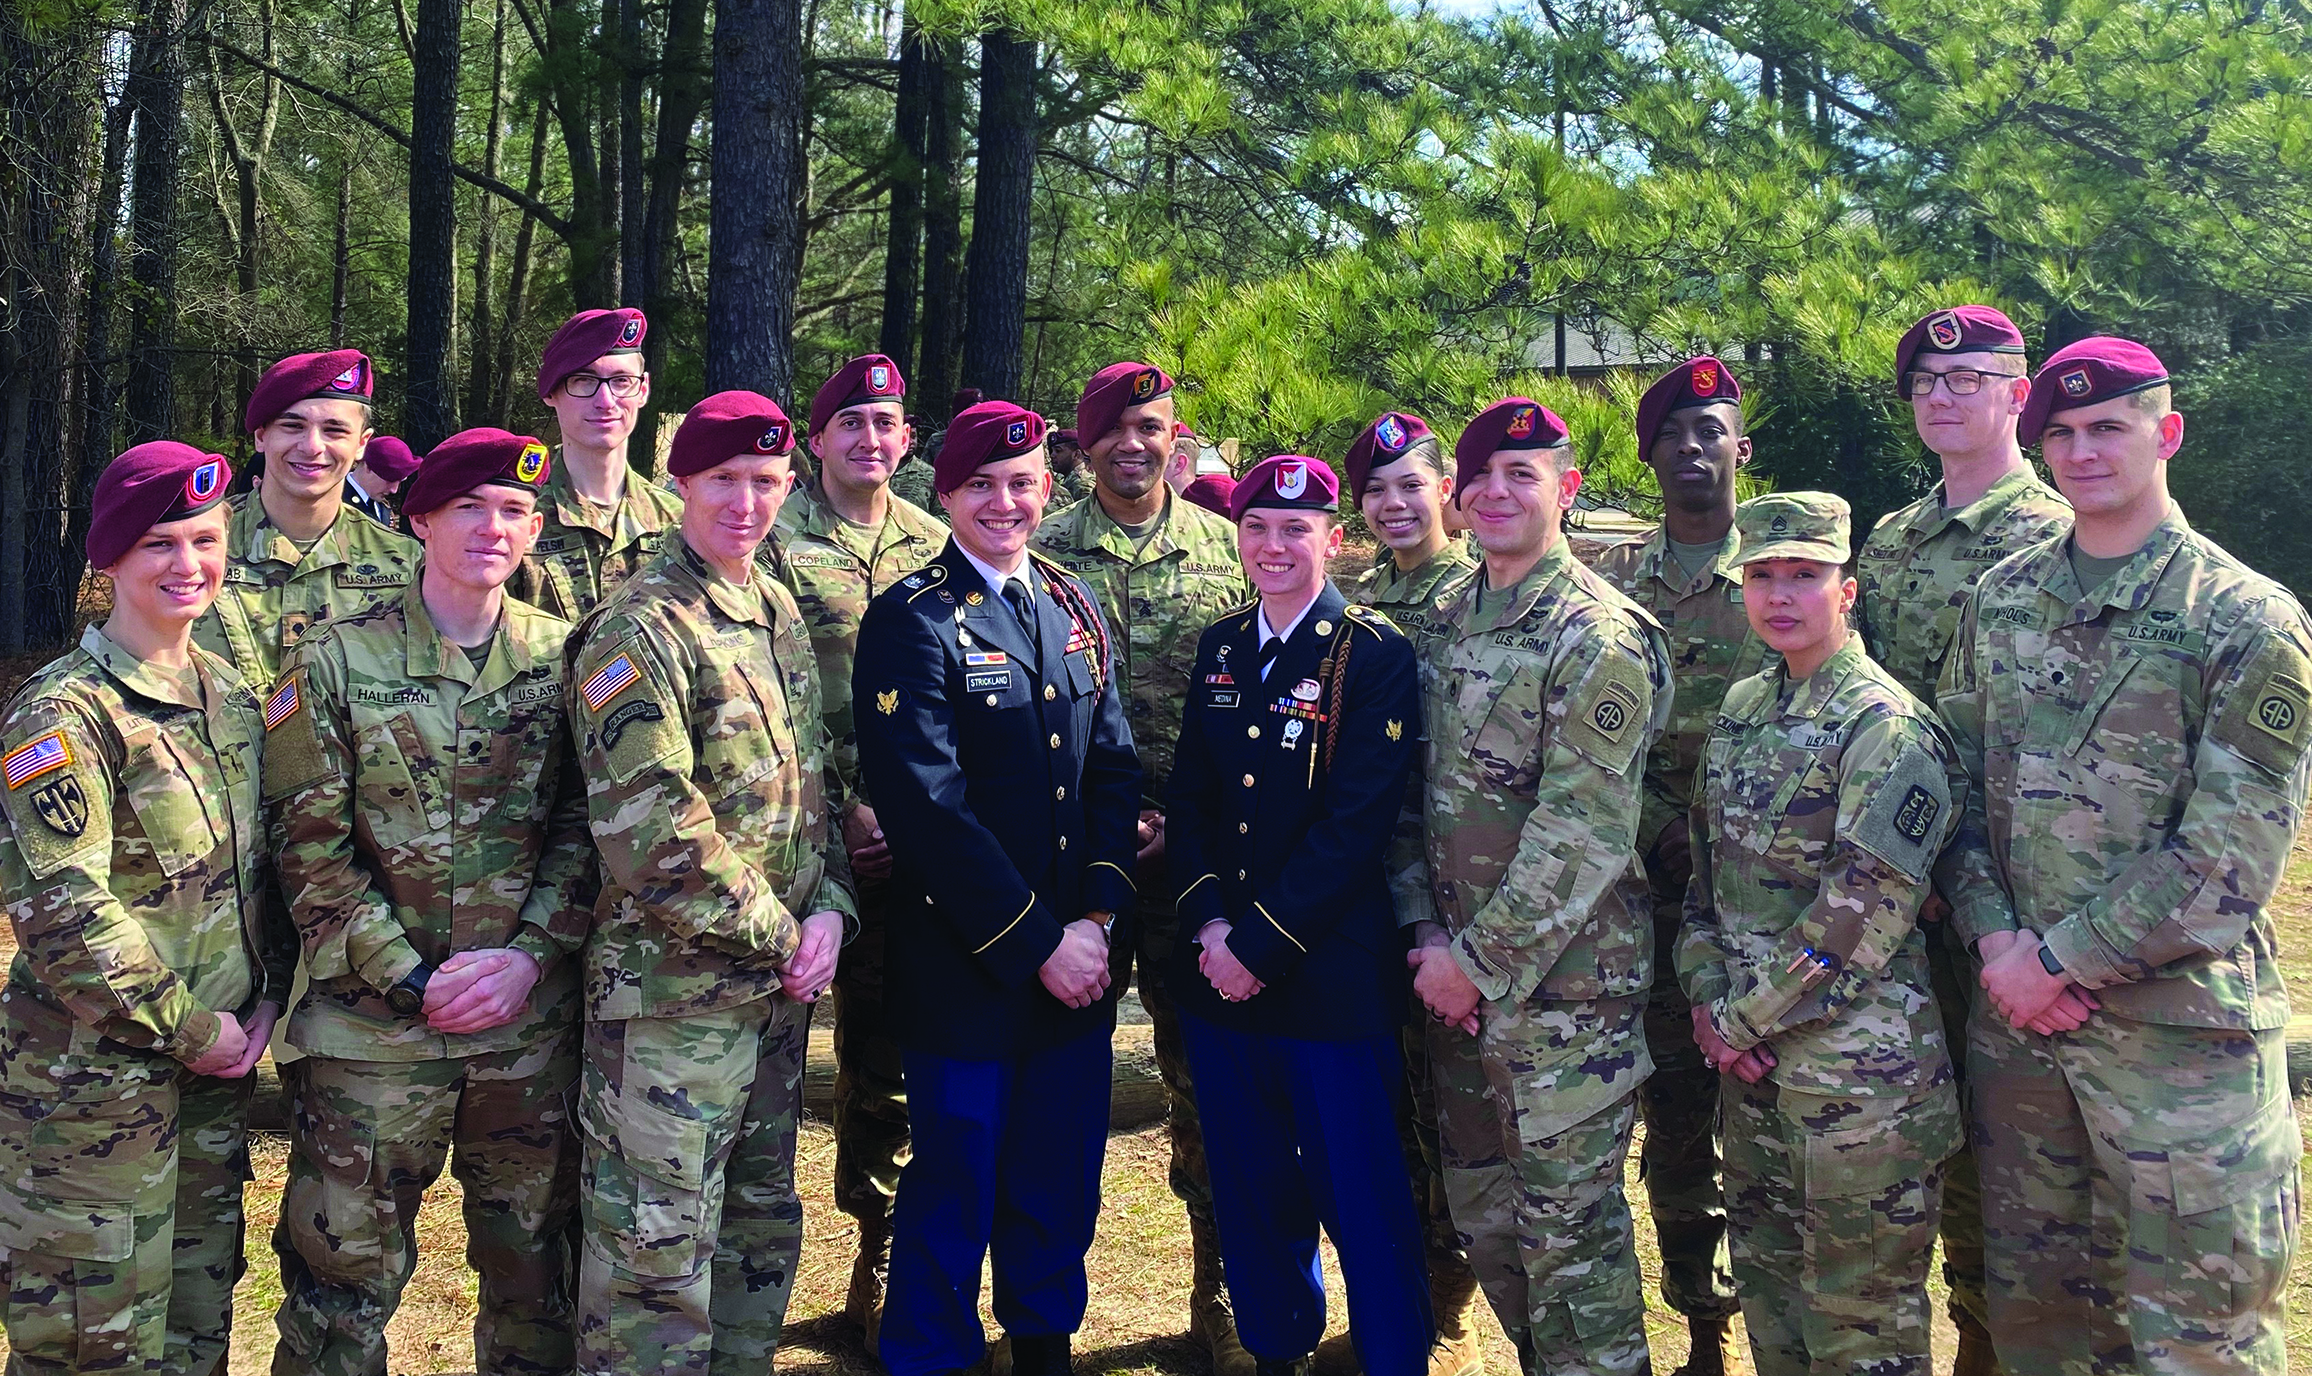 On 28 February 2020, MSG Dan Hopkins and members of the 82d Airborne Division OSJA gathered to congratulate the most recent All-American graduates of the Fort Bragg Noncommissioned Officers Academy Basic Leader’s Course. The graduates (pictured center left to right) are SPC(P) Jacob Strickland of HHBn, 82d ABN DIV and SPC(P) Tiffany Medina of 82d ABN DIV Combat Aviation Brigade. (Not pictured: CPL(P) Jordan Reyes of 3d BCT, 82d ABN DIV